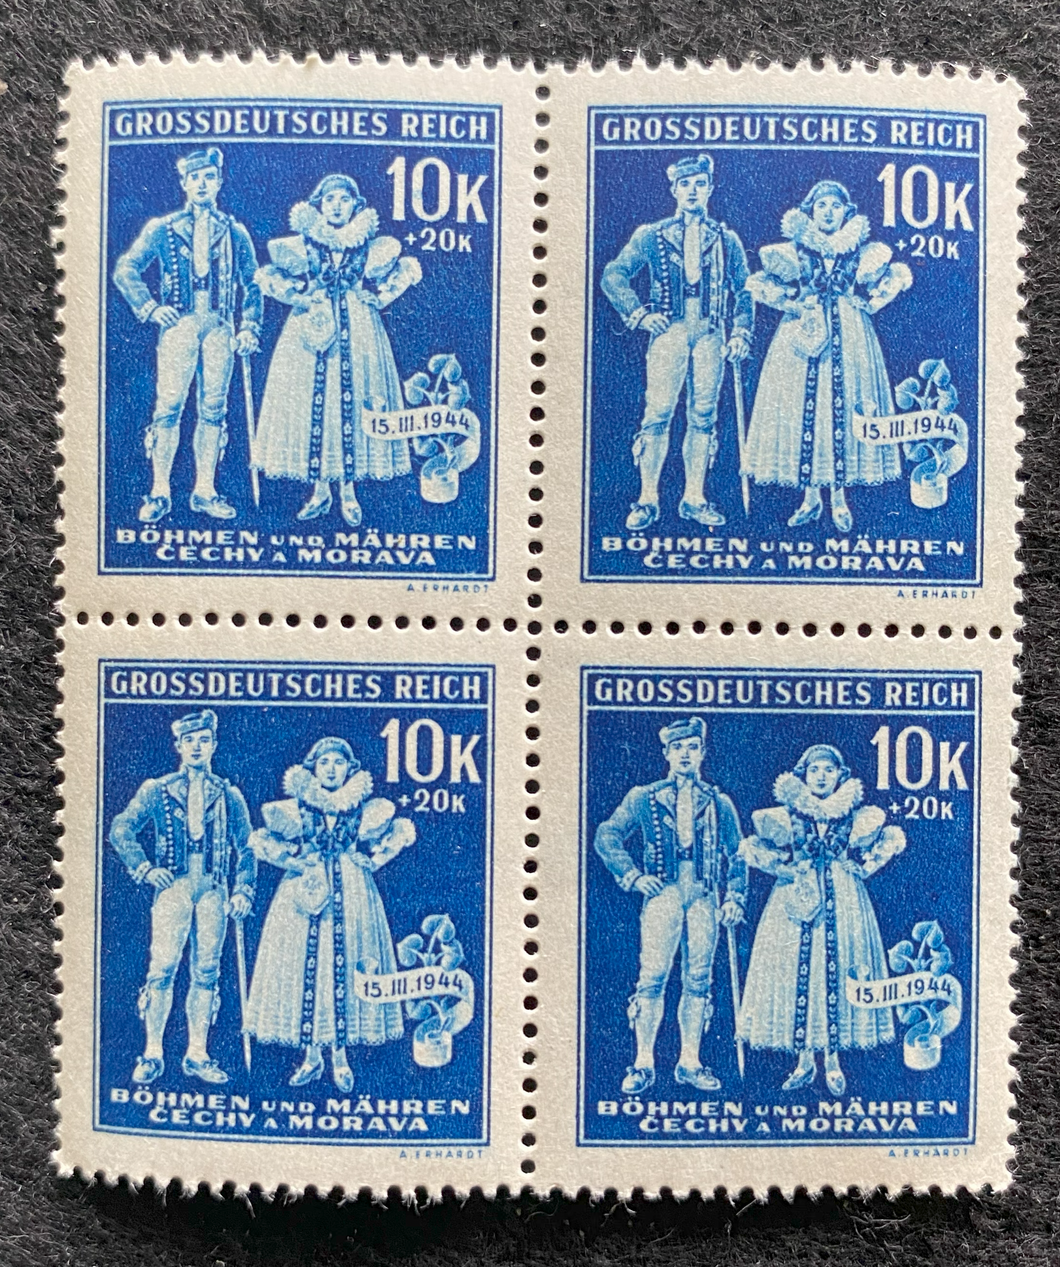 Rare Old Antique Authentic WWII Unused German Nazi Stamp King Queen Year 1944- 10 K Block Of 4 - Collectors Couch